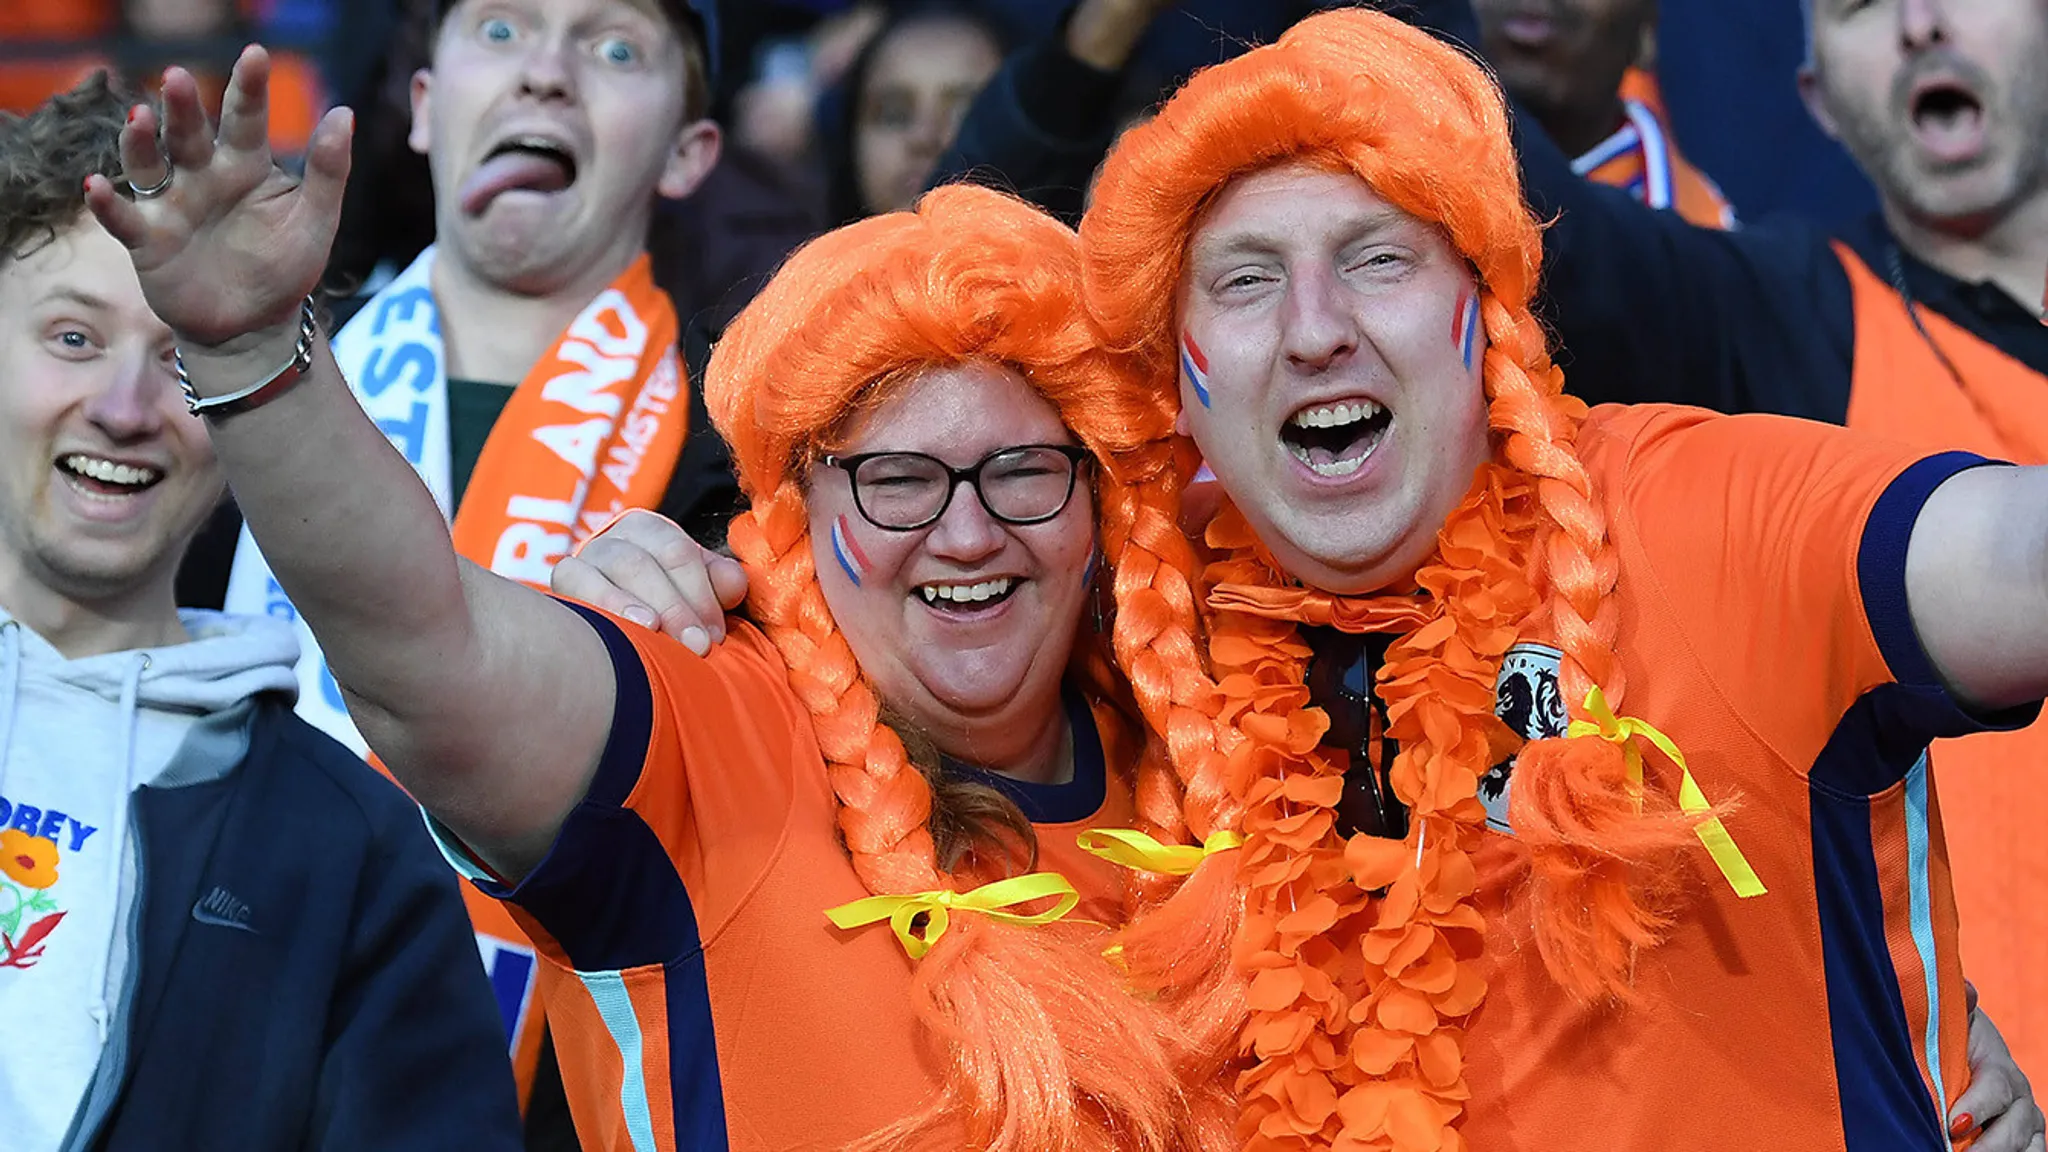 Up to 40,000 Dutch fans are expected in Leipzig.